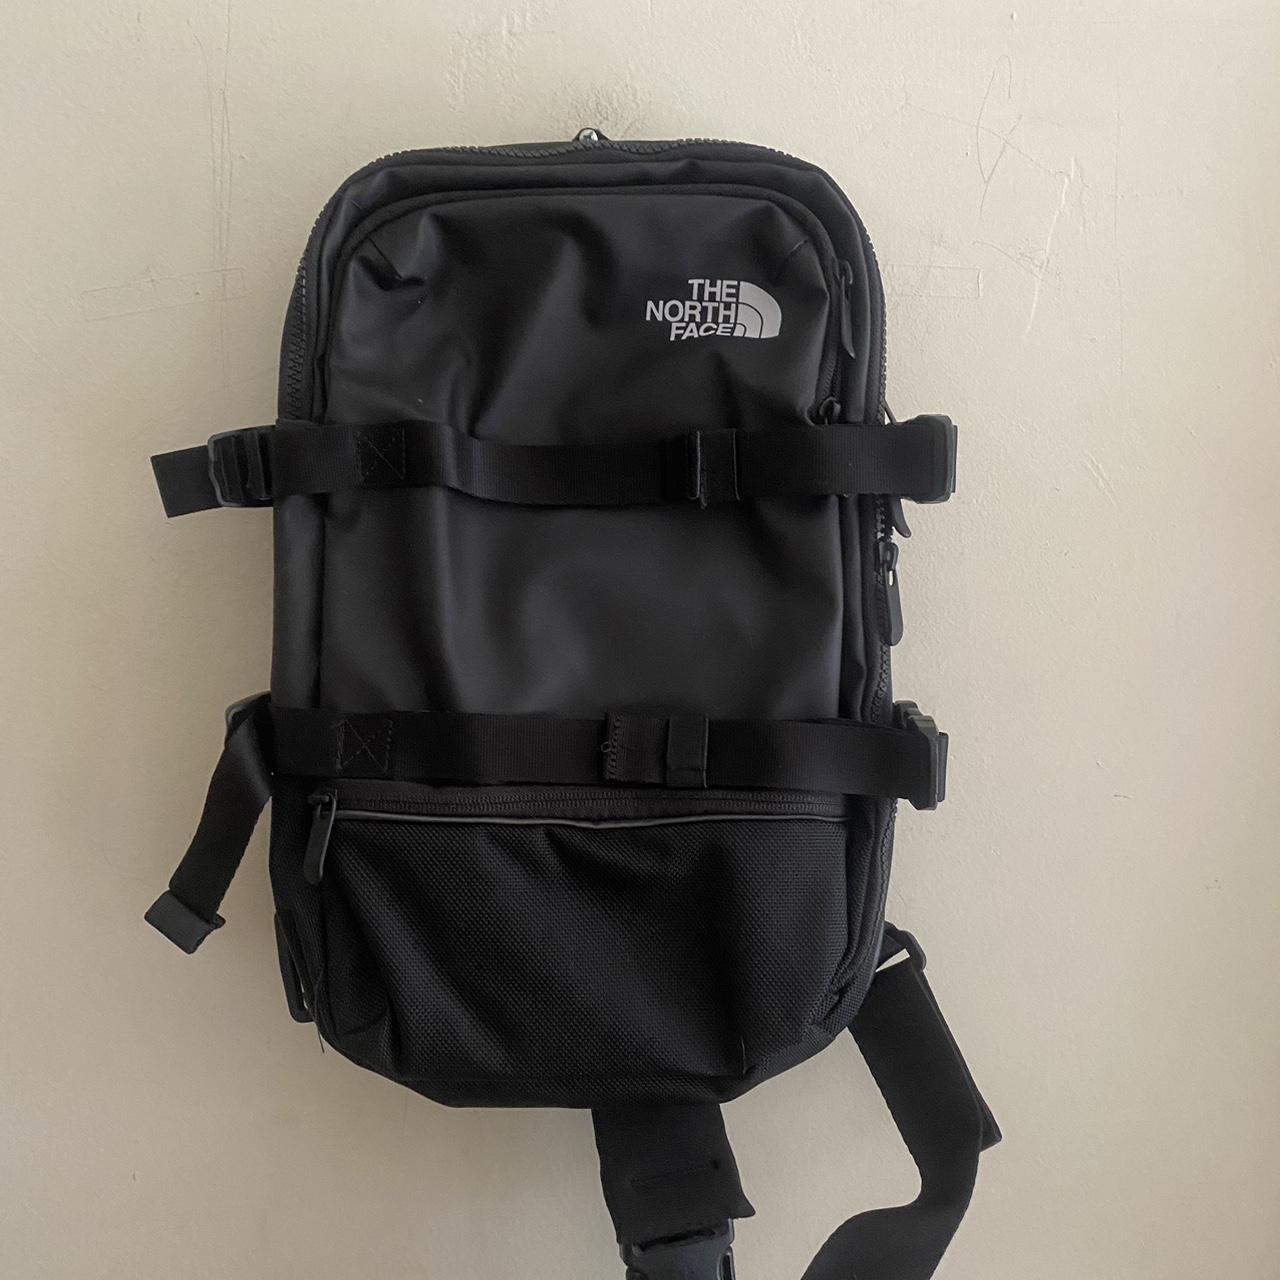 The North Face Men's Bag